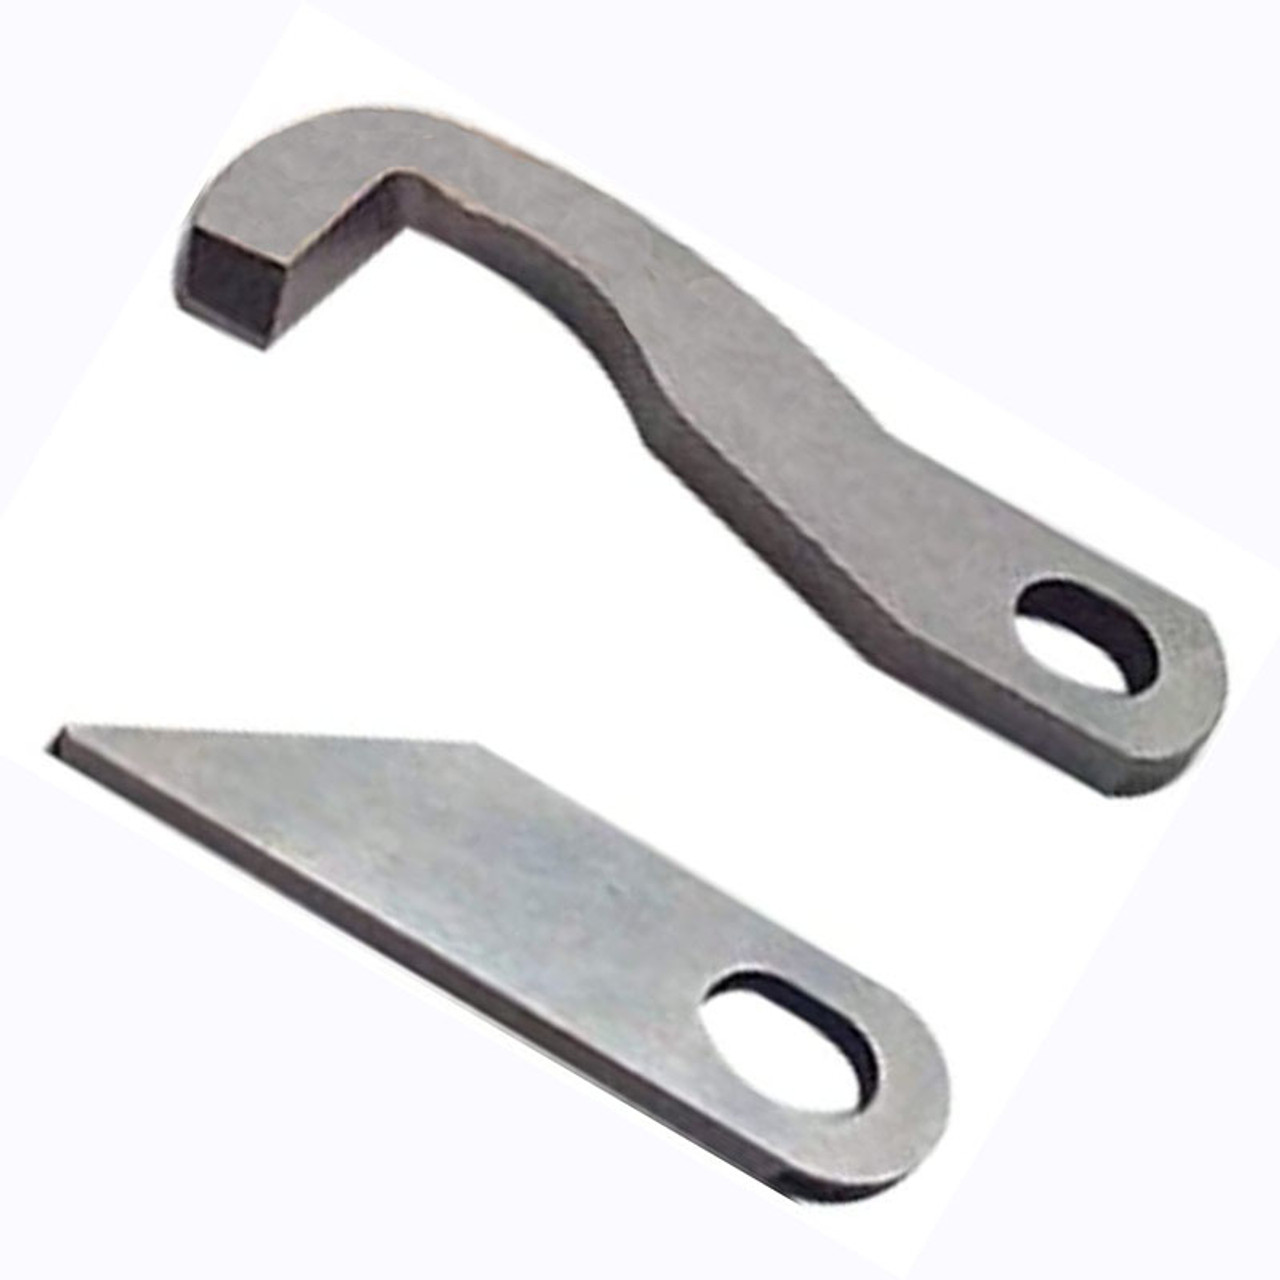 Brother 3034D upper and lower blade set